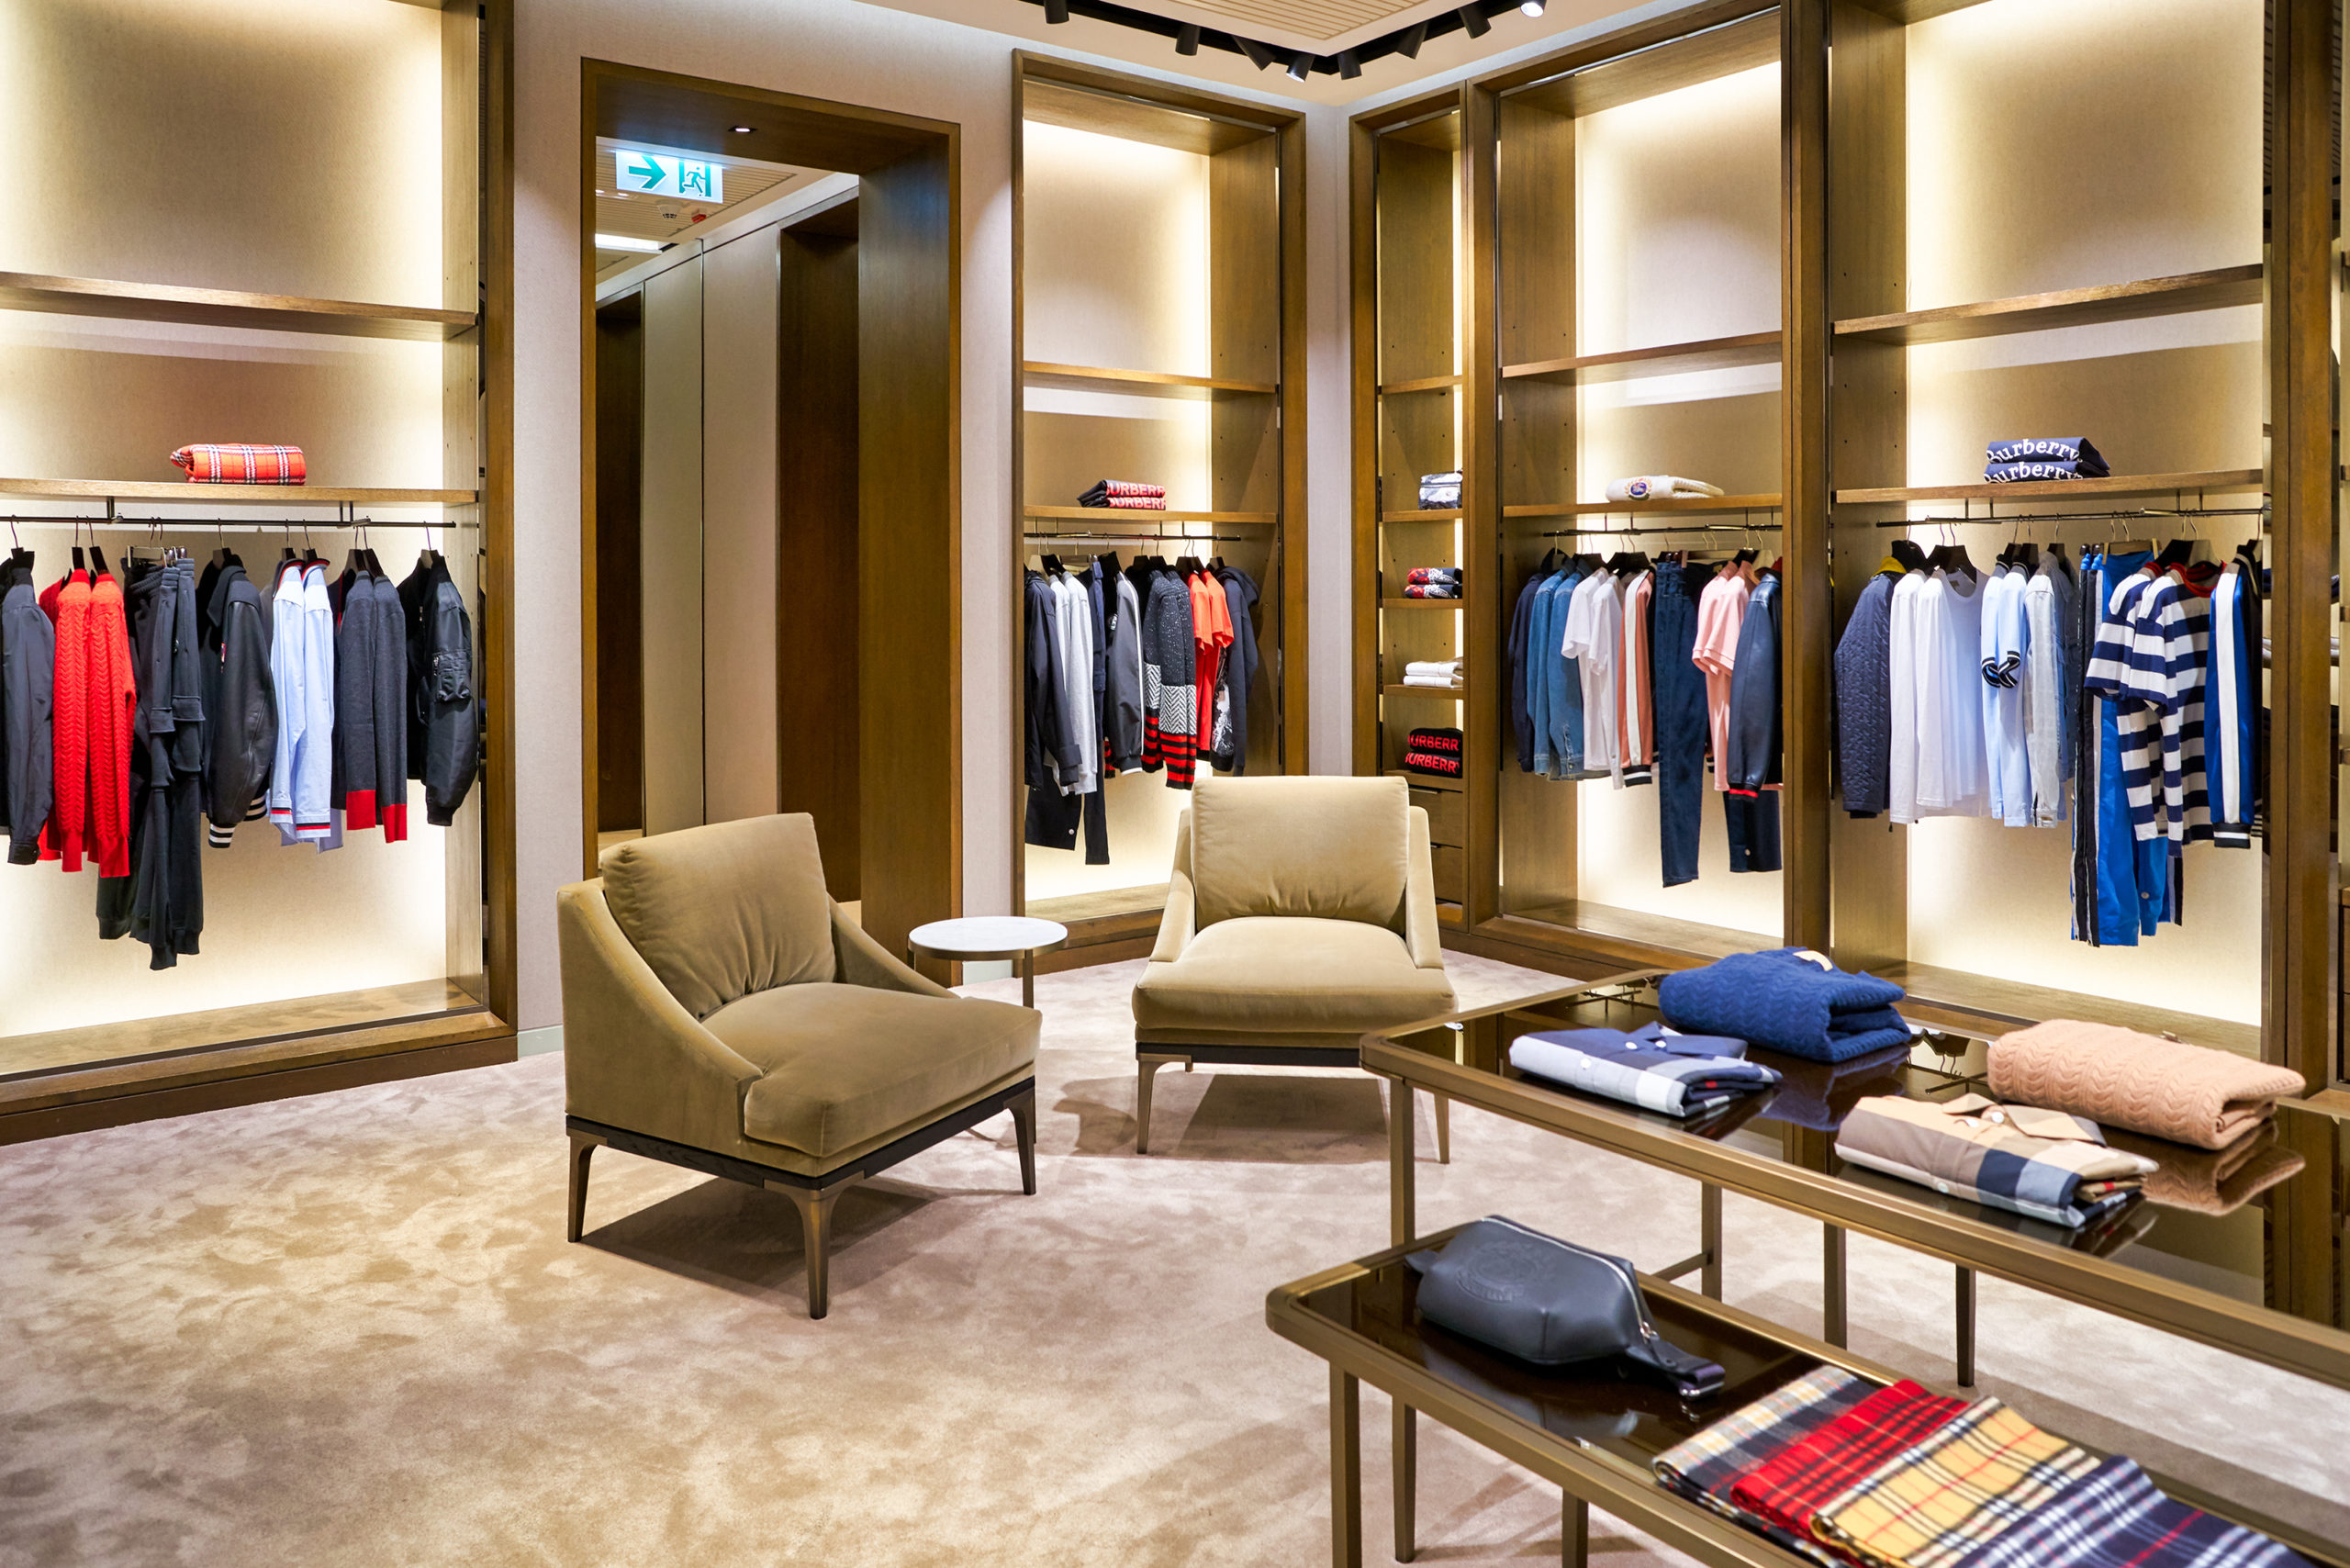 Burberry CFO, COO Julie Brown to Depart Company – Visual Merchandising and  Store Design